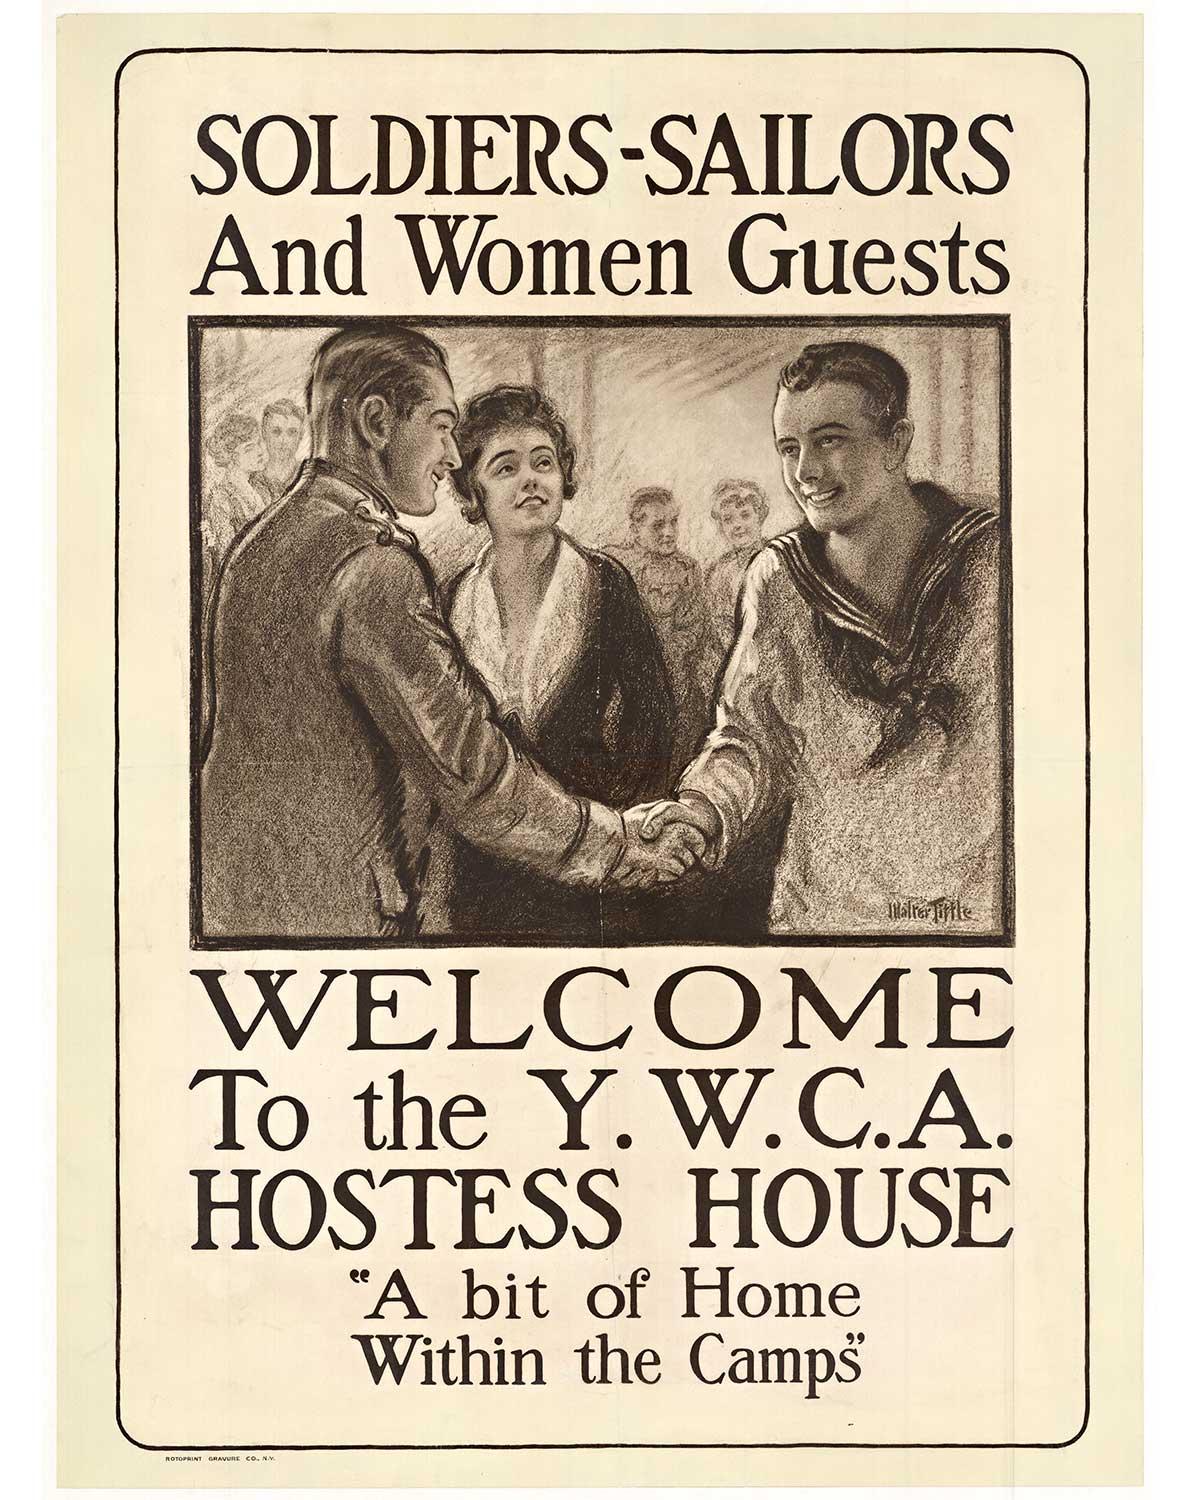 Walter Tittle Interior Print - Original 'Soldiers - Sailors and Women Guests' Welcome to the YWCA Hostess House